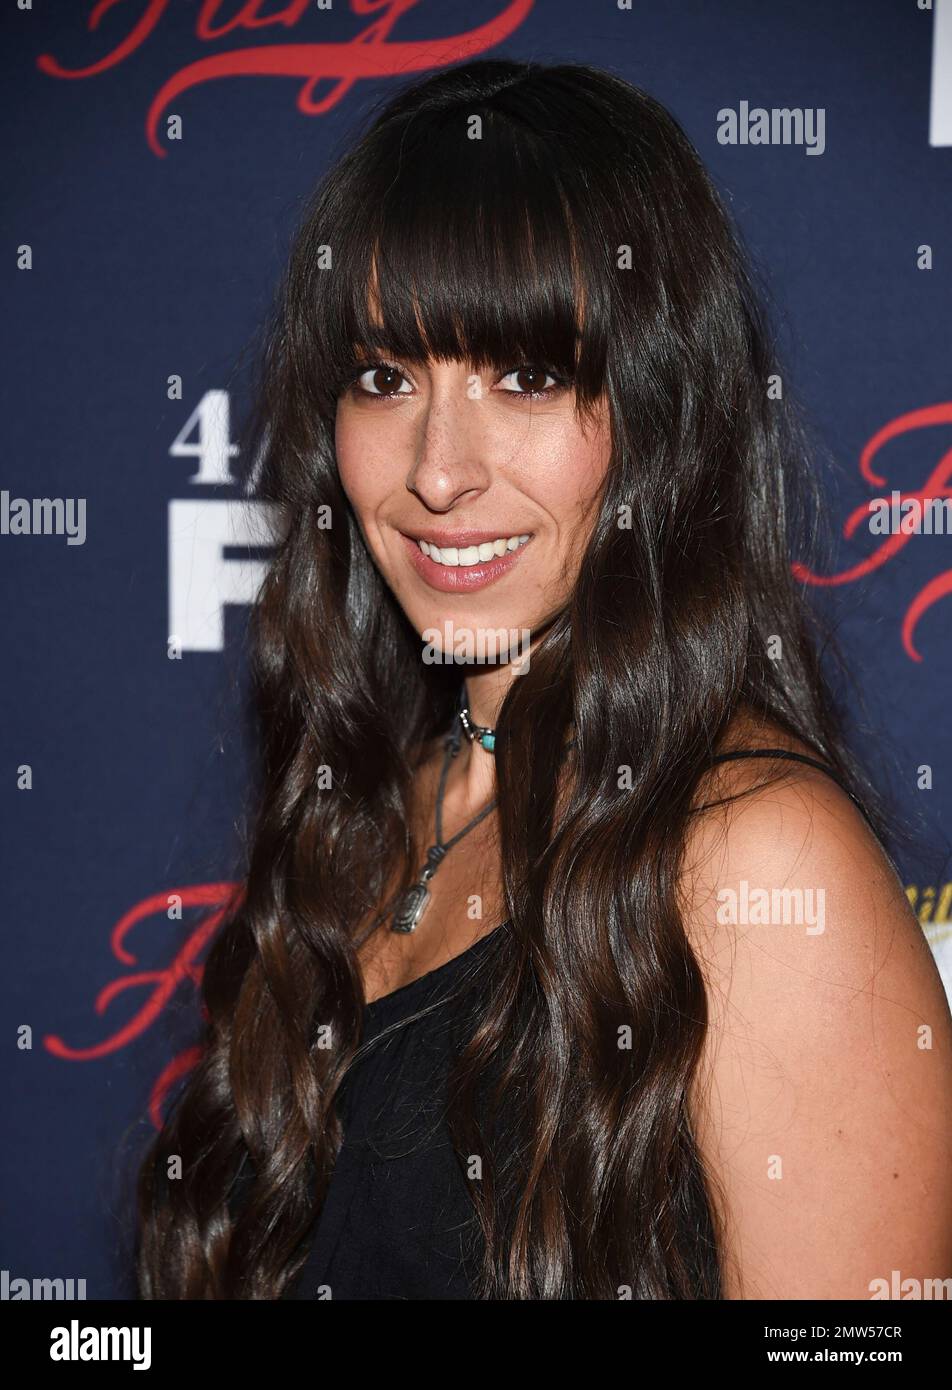 Actress Oona Chaplin Attends Fxs 2017 All Star Upfront Event At The